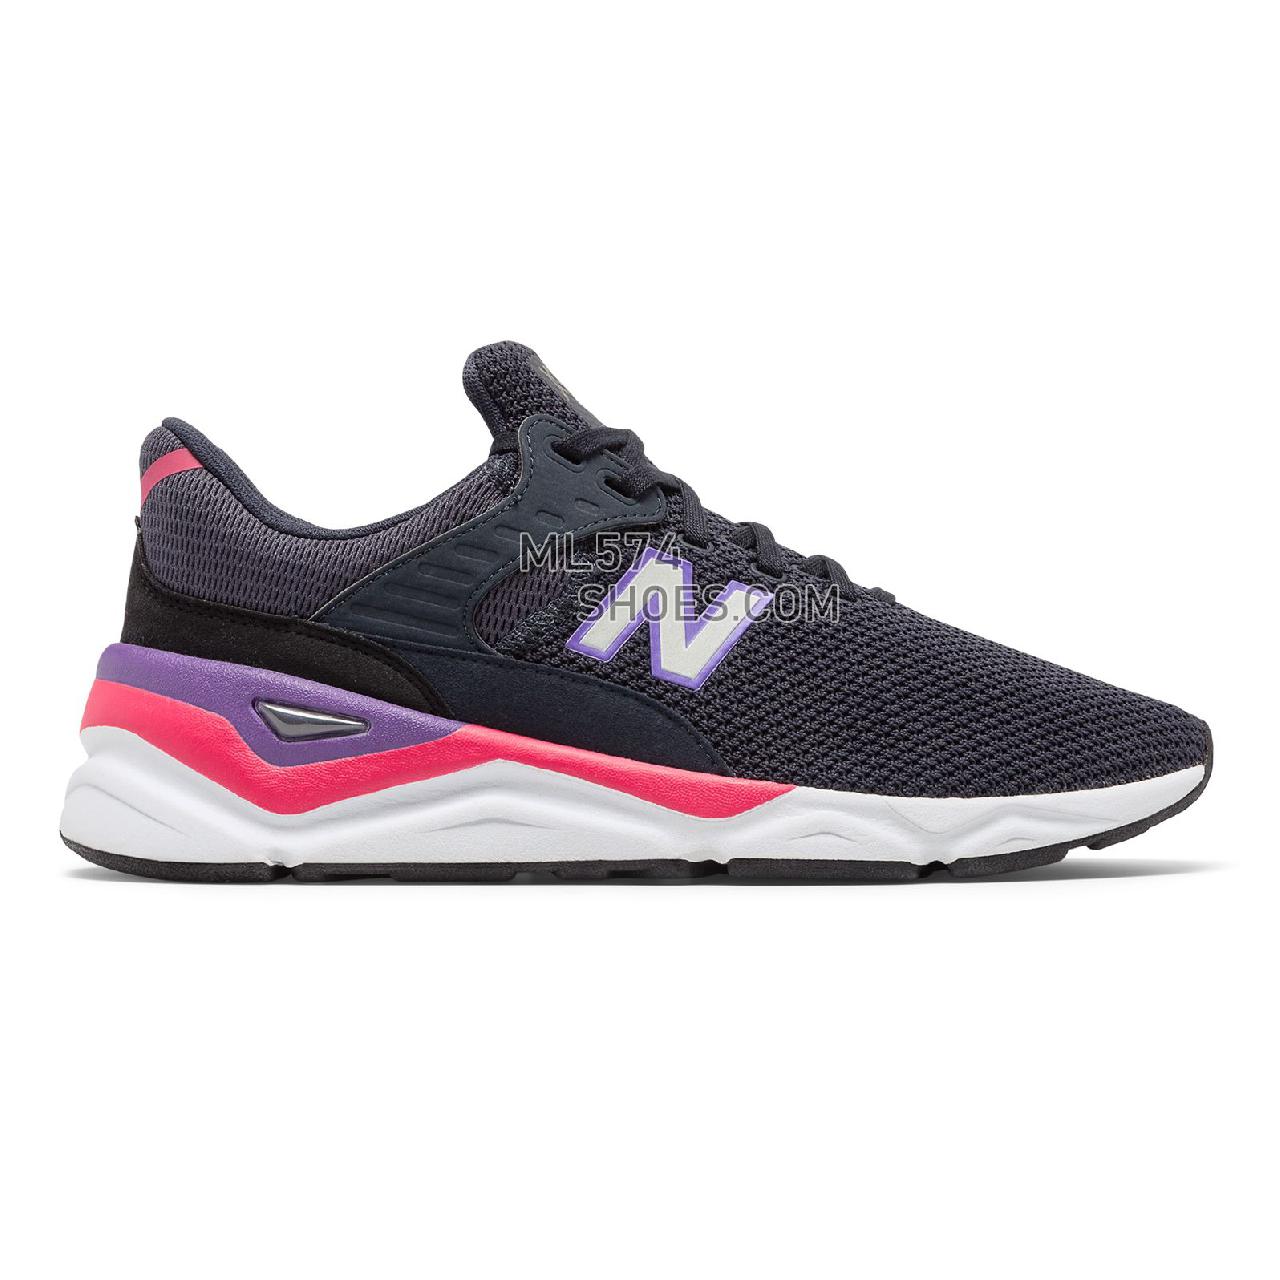 New Balance X-90 - Men's 90 - Classic Outerspace with Pink - MSX90CRC